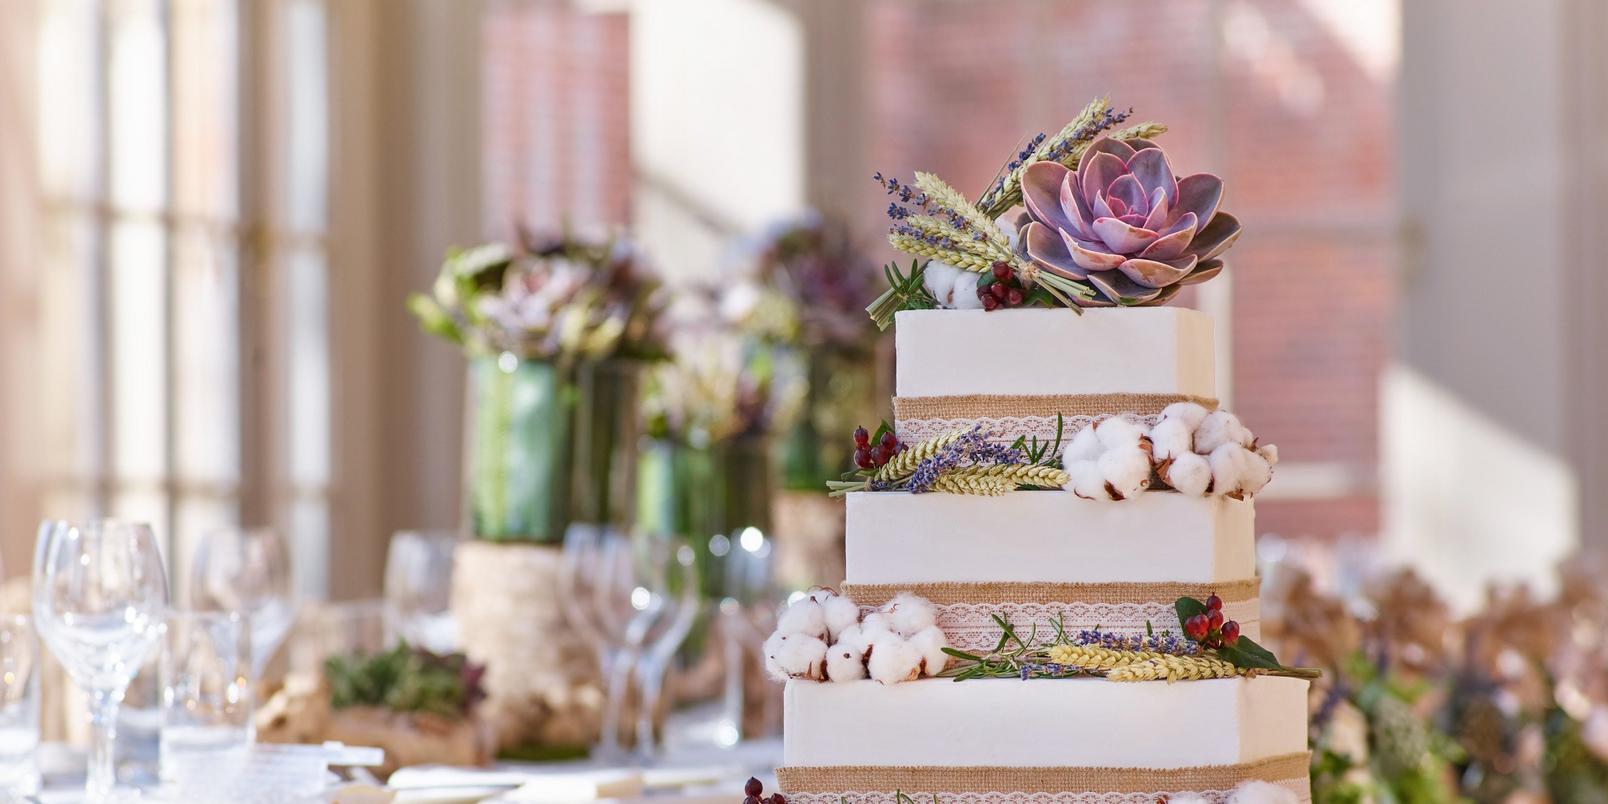 wedding-cake-ideas-with-real-flowers-3